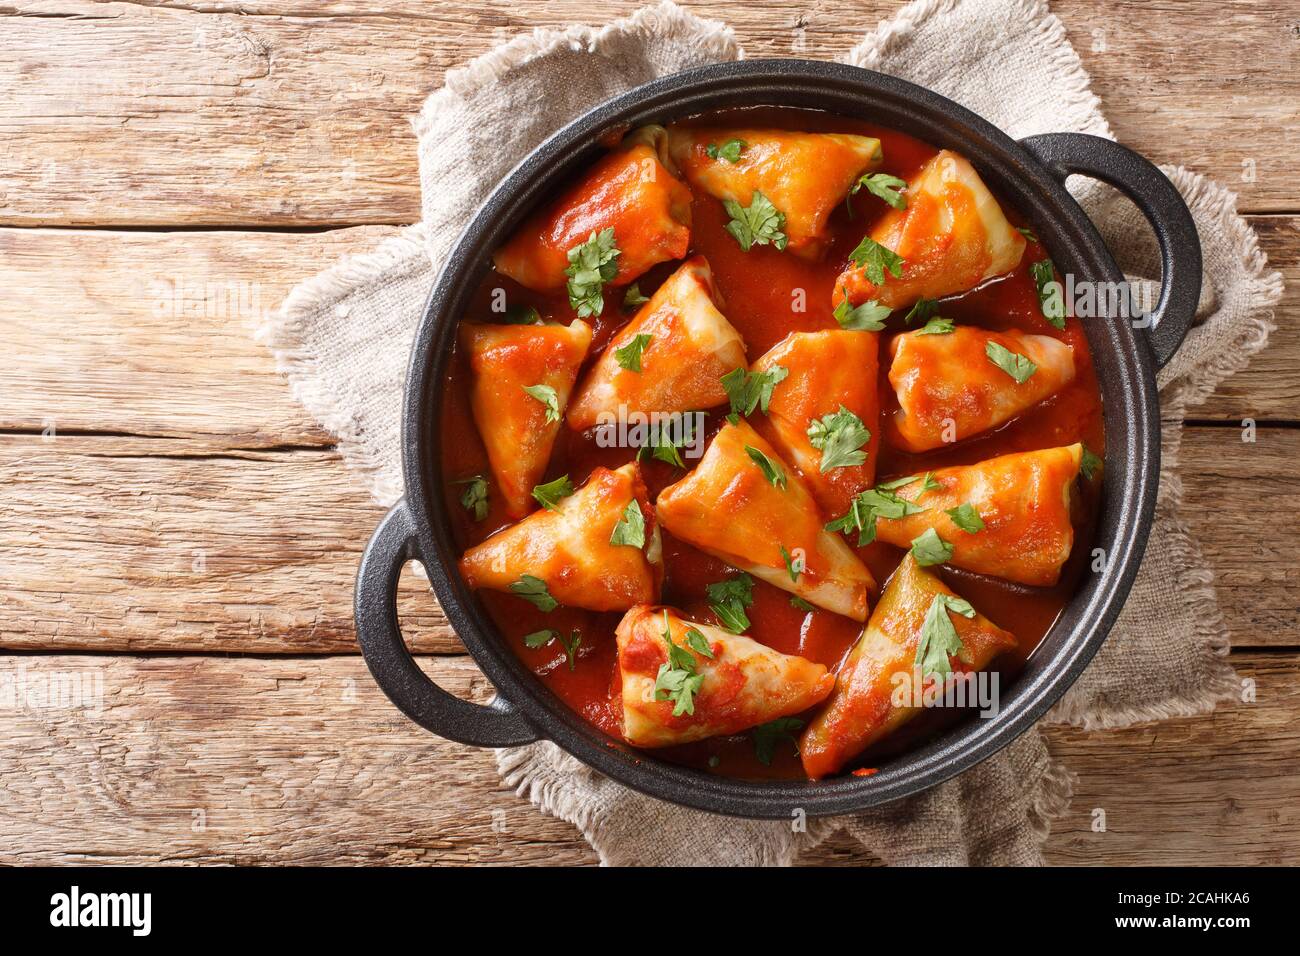 cabbage rolls stuffed with ground beef and rice and baked with a hot tomato sauce close-up in a bowl on the table. Horizontal top view from above Stock Photo